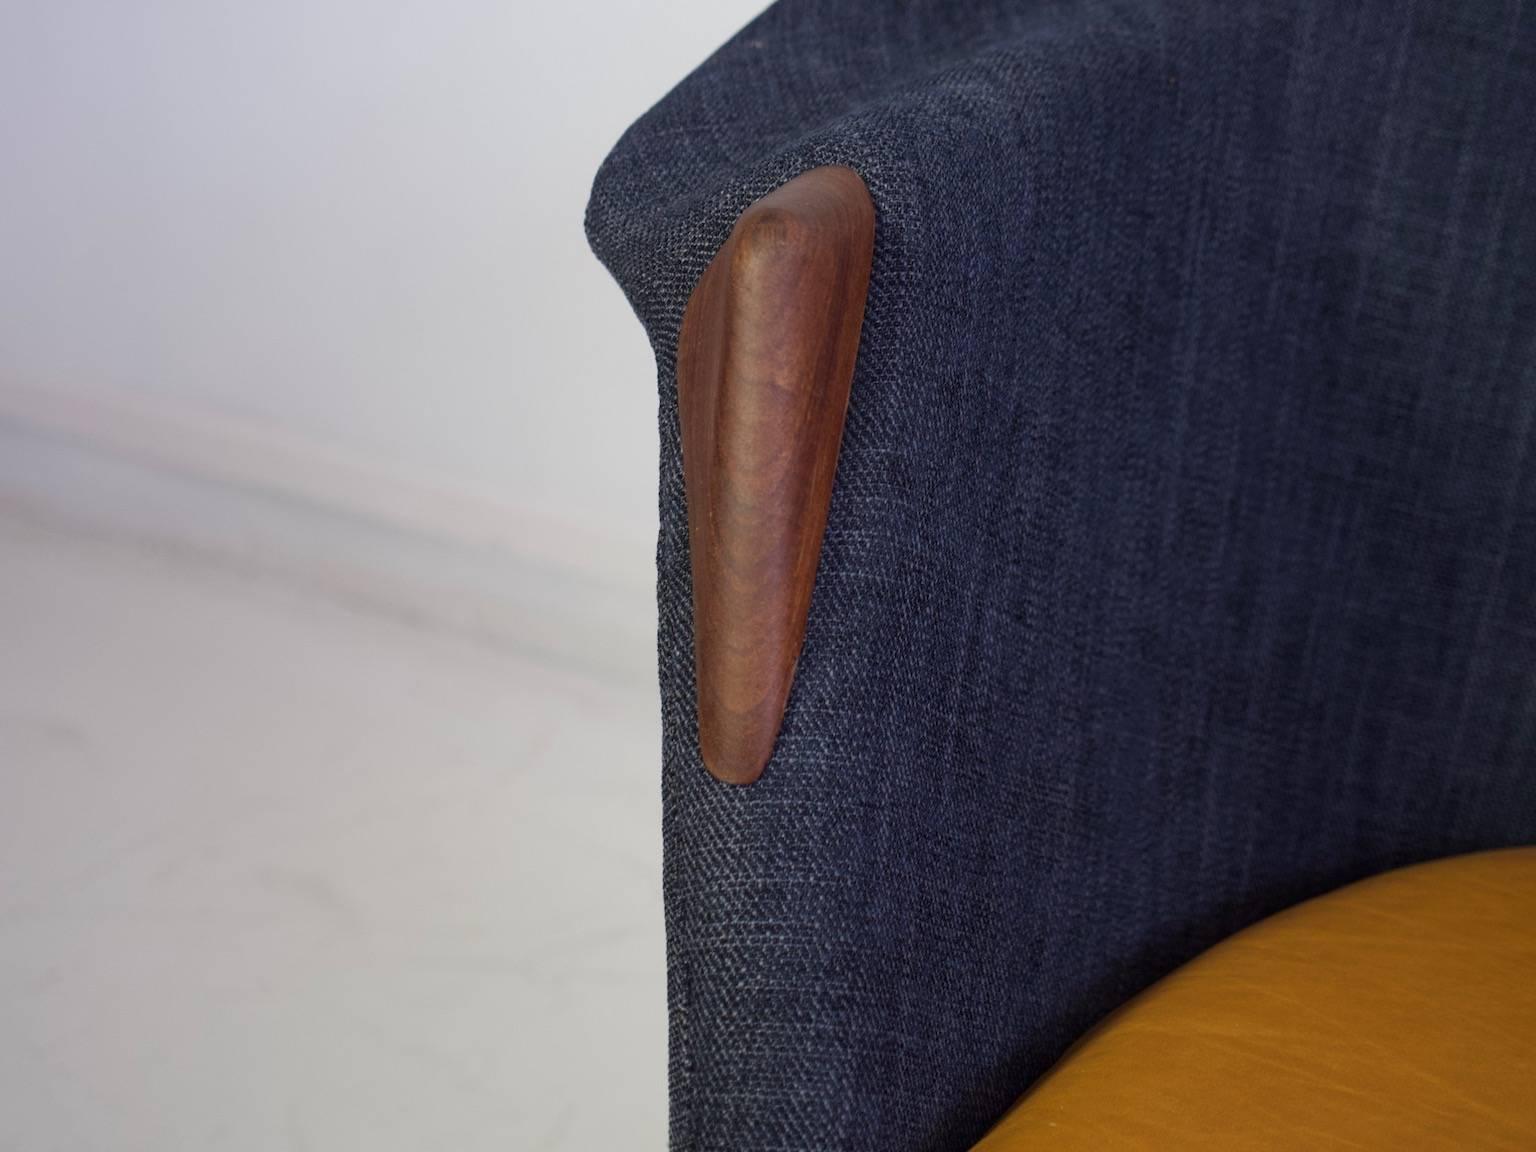 Lounge Chair Upholstered with Dark Blue Fabric and Cognac Leather on Oak Legs 3